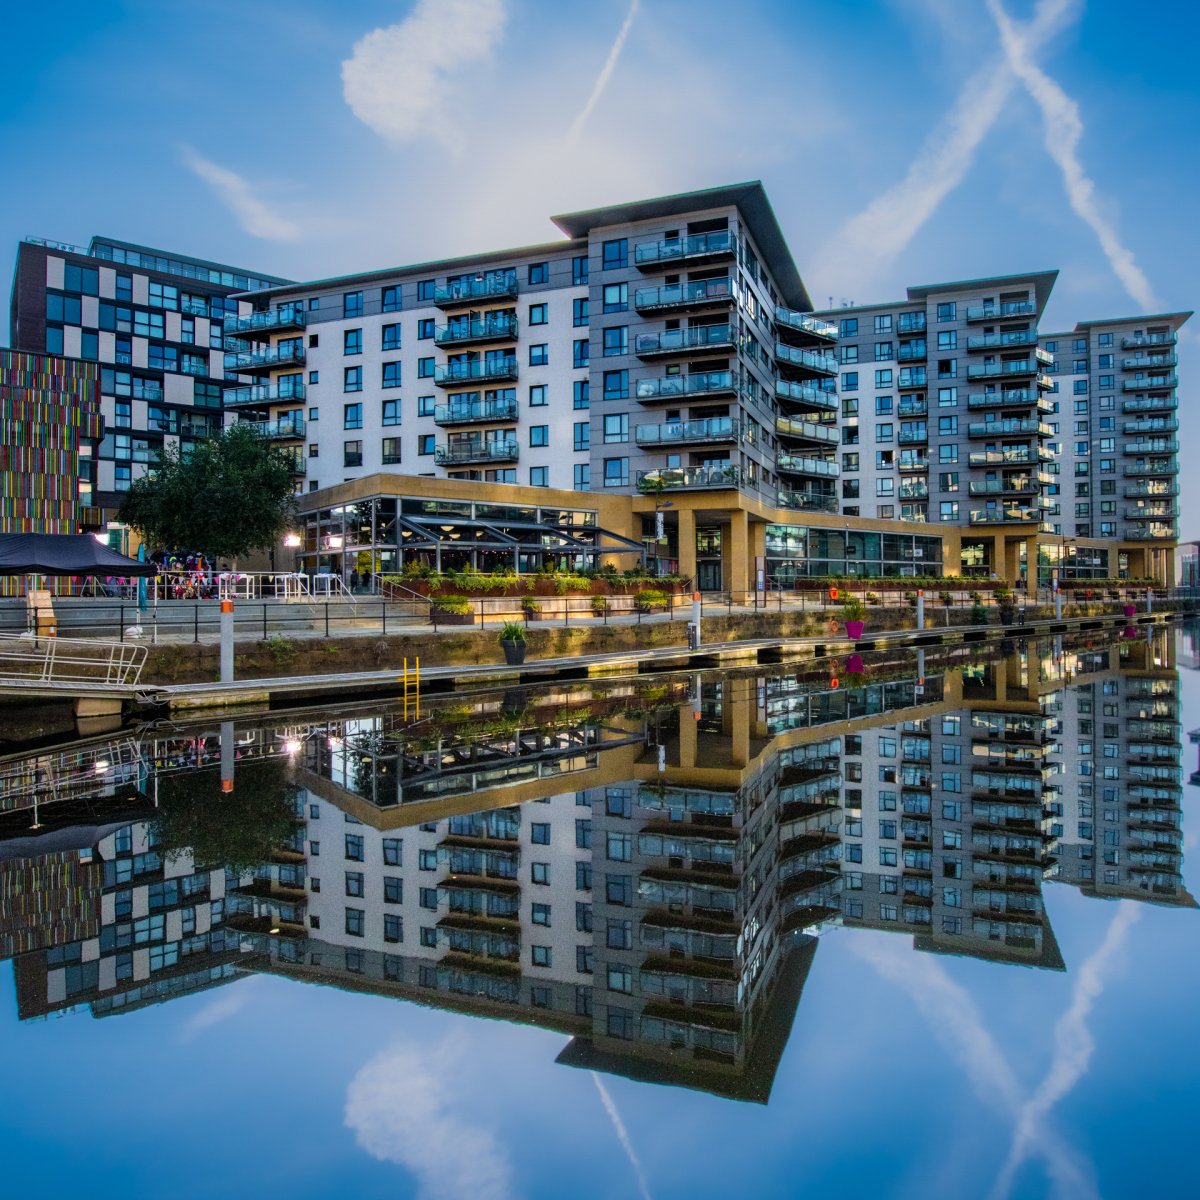 H529_Alistair How_3556_Leeds docklands at dawn_First.jpg